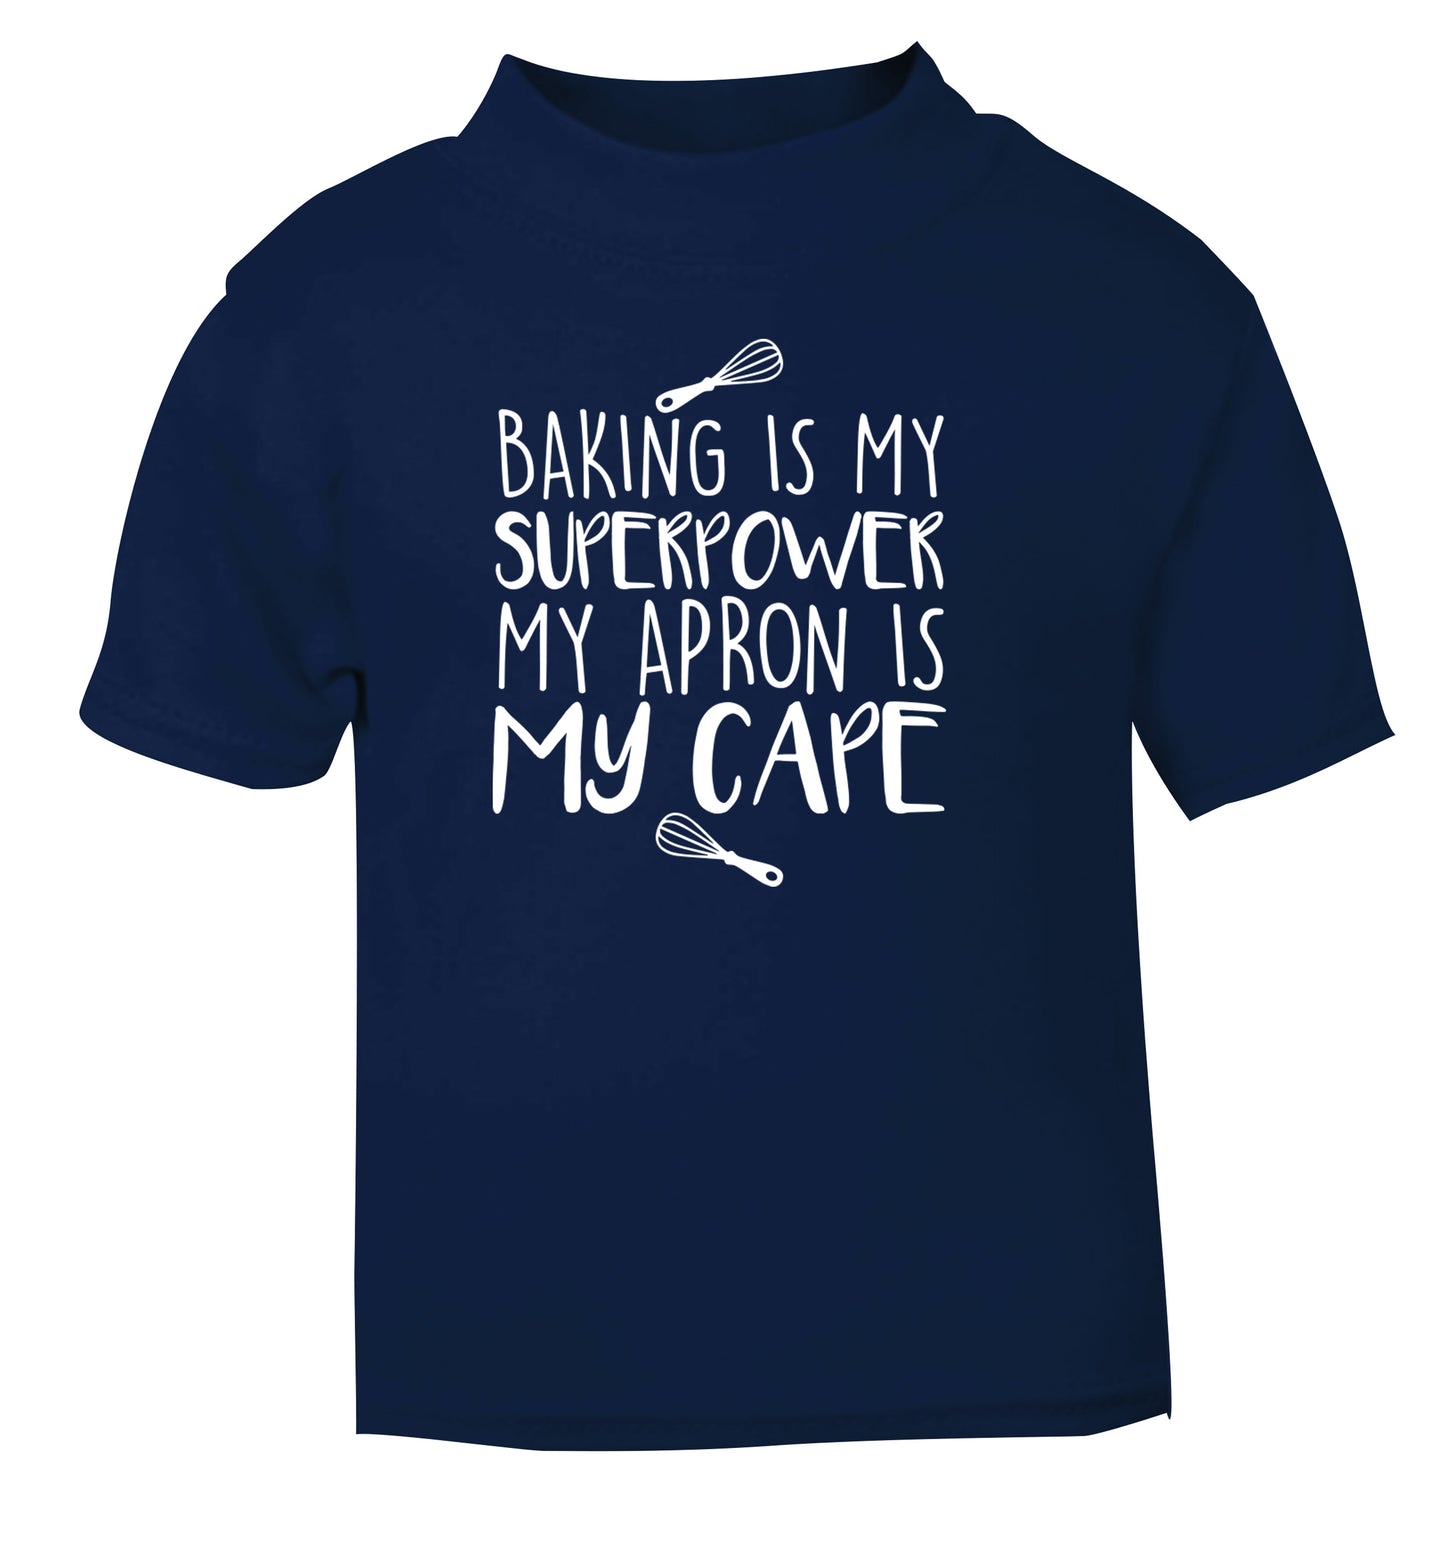 Baking is my superpower my apron is my cape navy Baby Toddler Tshirt 2 Years